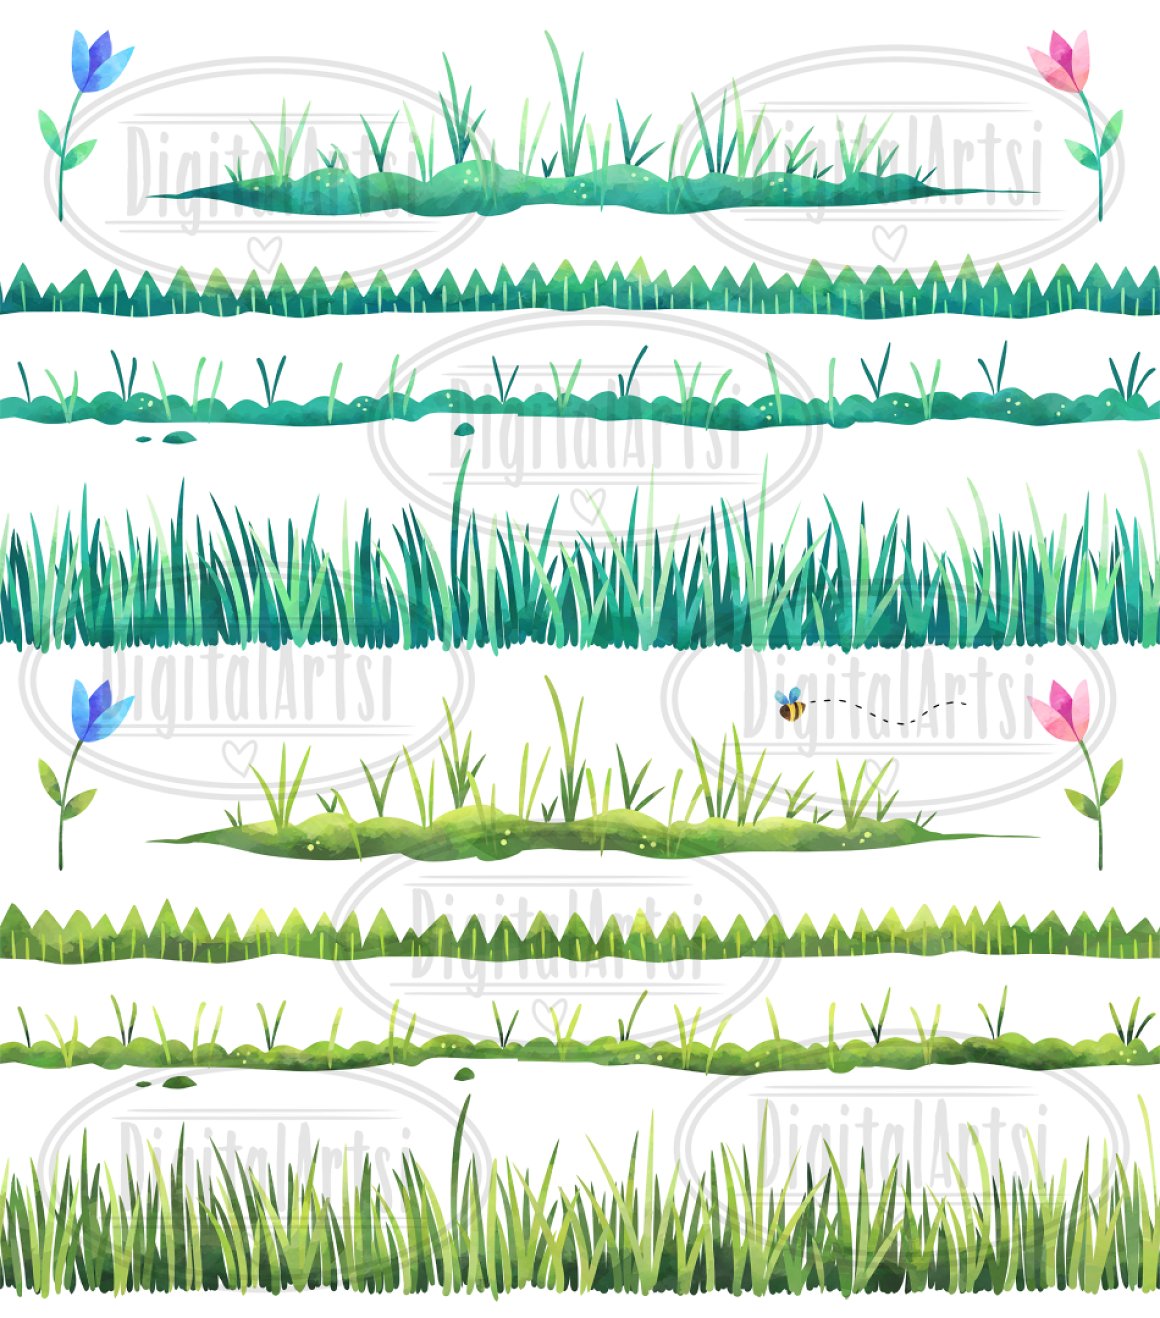 Two options of grass.